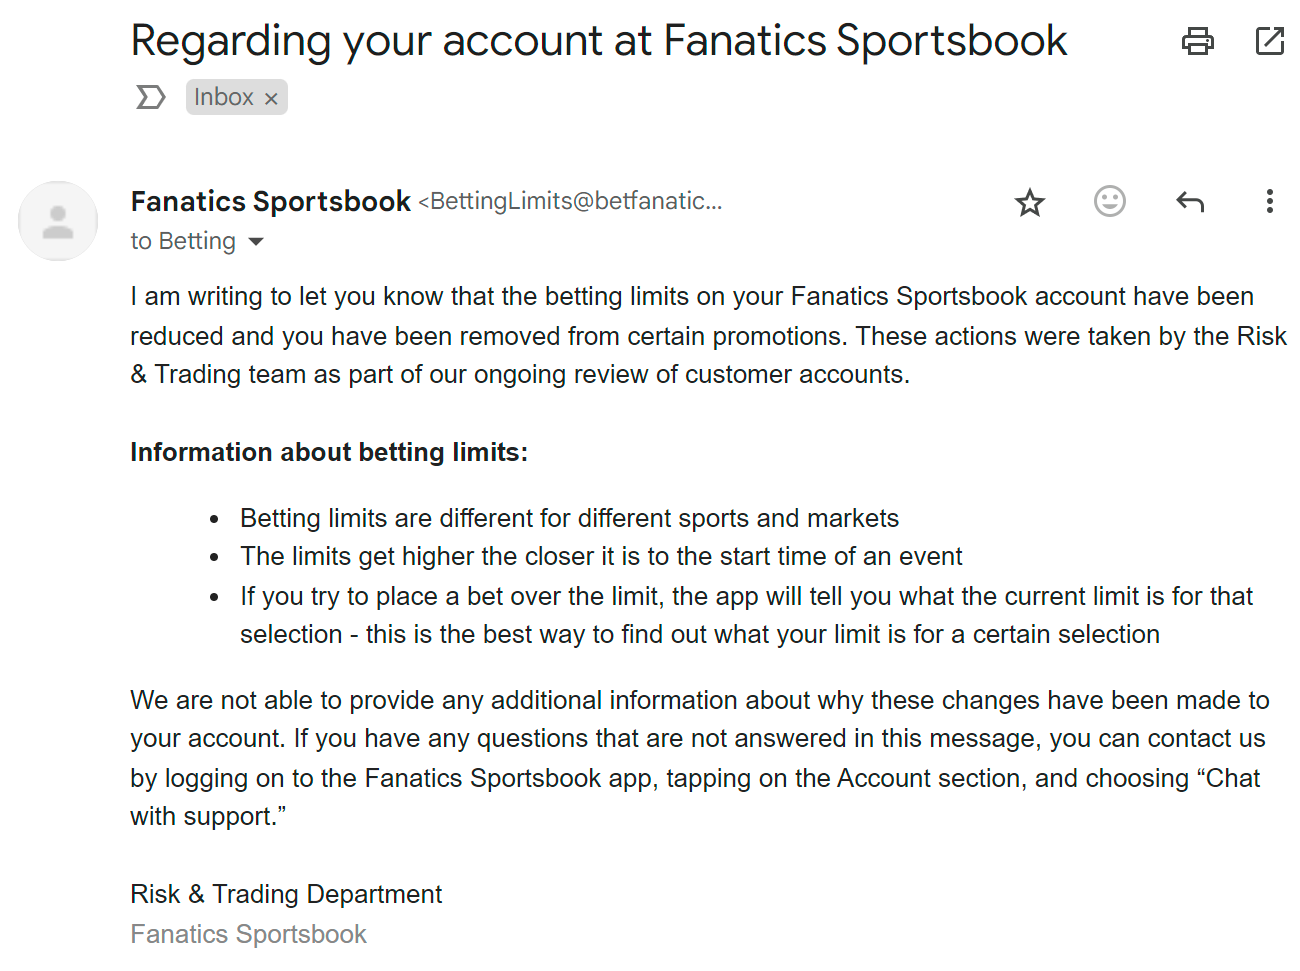 Email from Fanatics Sportsbook telling a customer they are limited